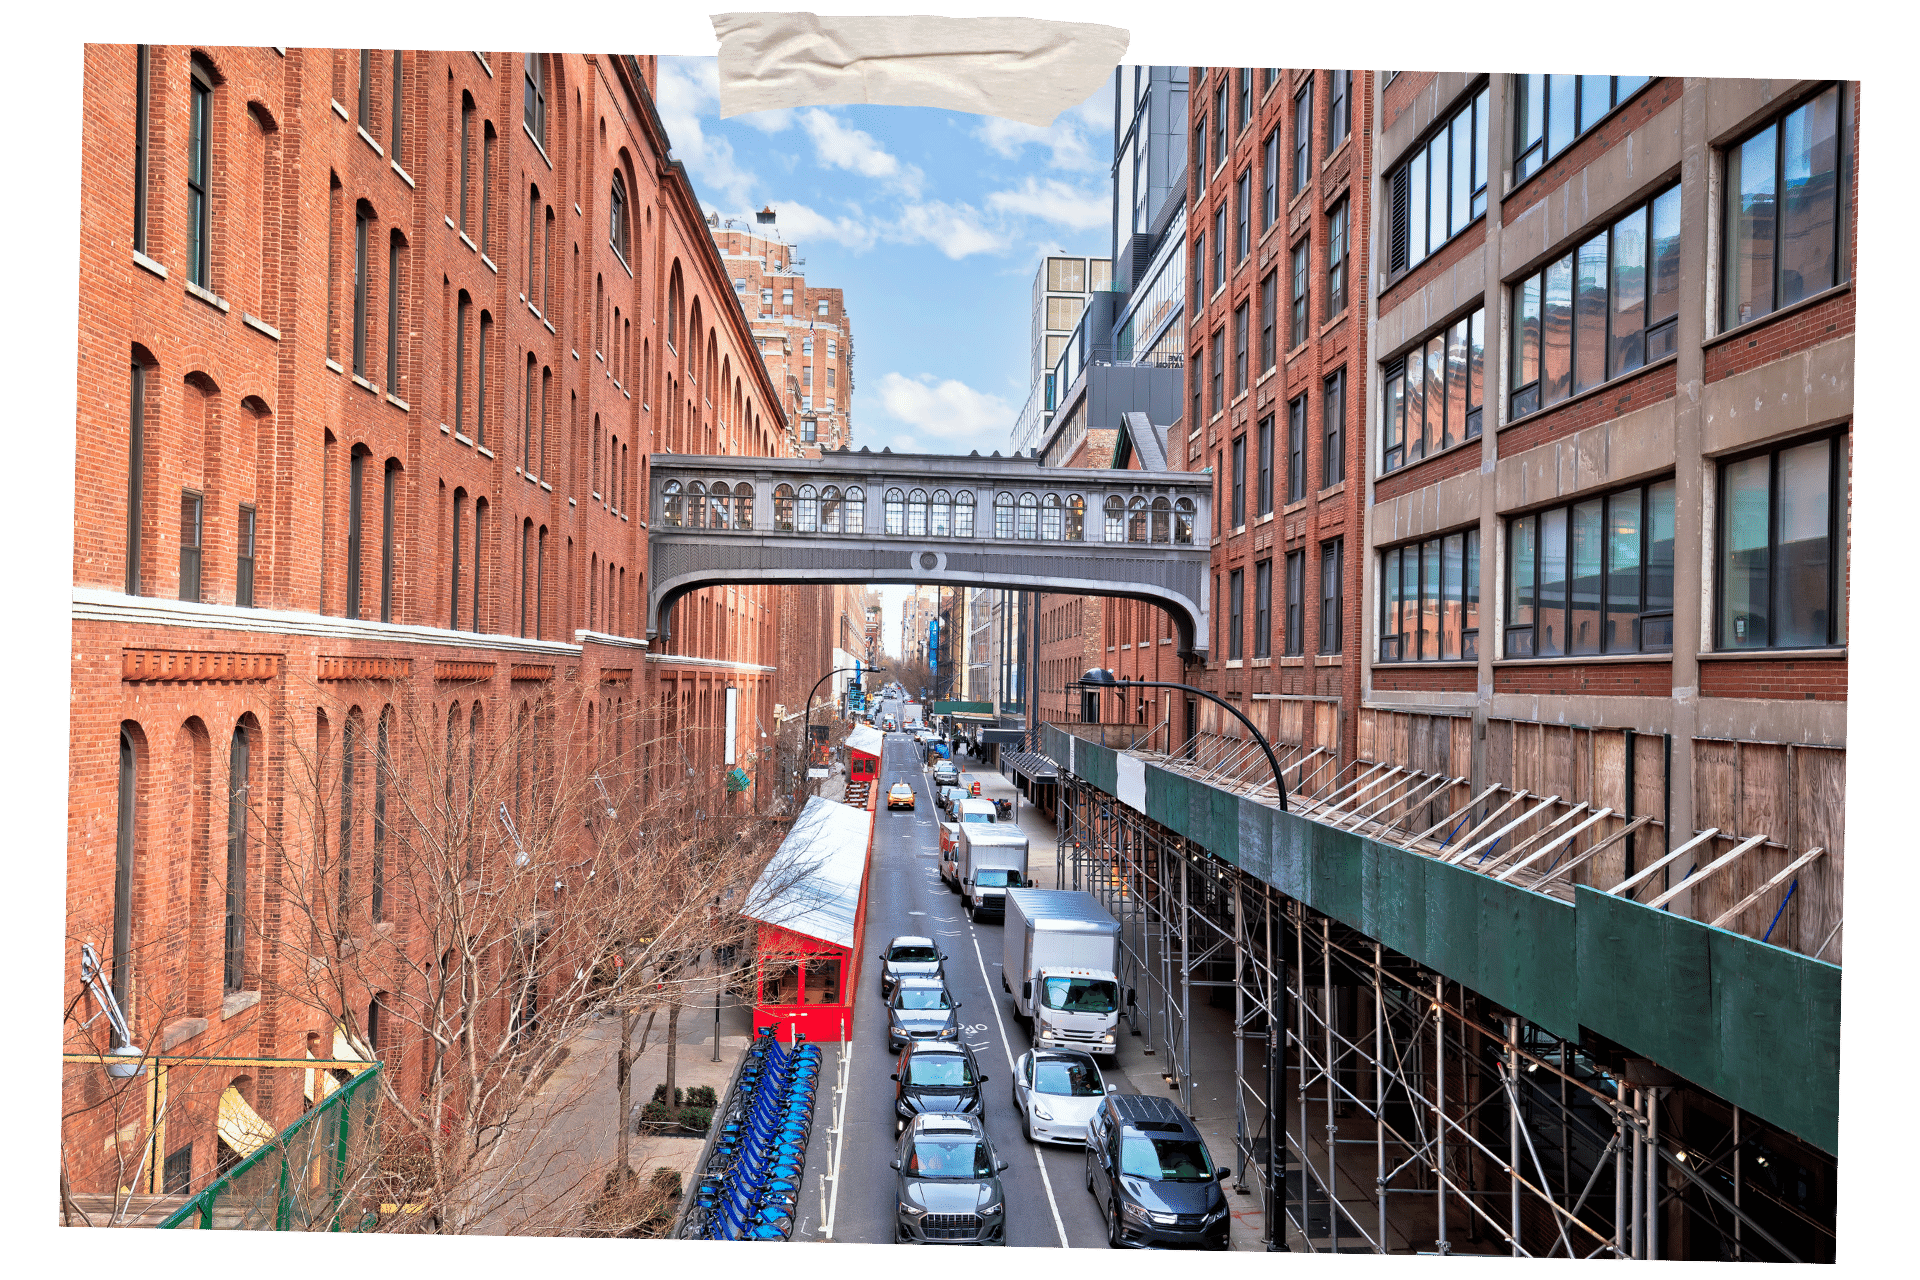 When it comes to New York for Foodies, you have to visit a food market. Pictured is a street in New York, building either side and a bridge connecting the two. On the ground floor level is the entrance to Chelsea Market.